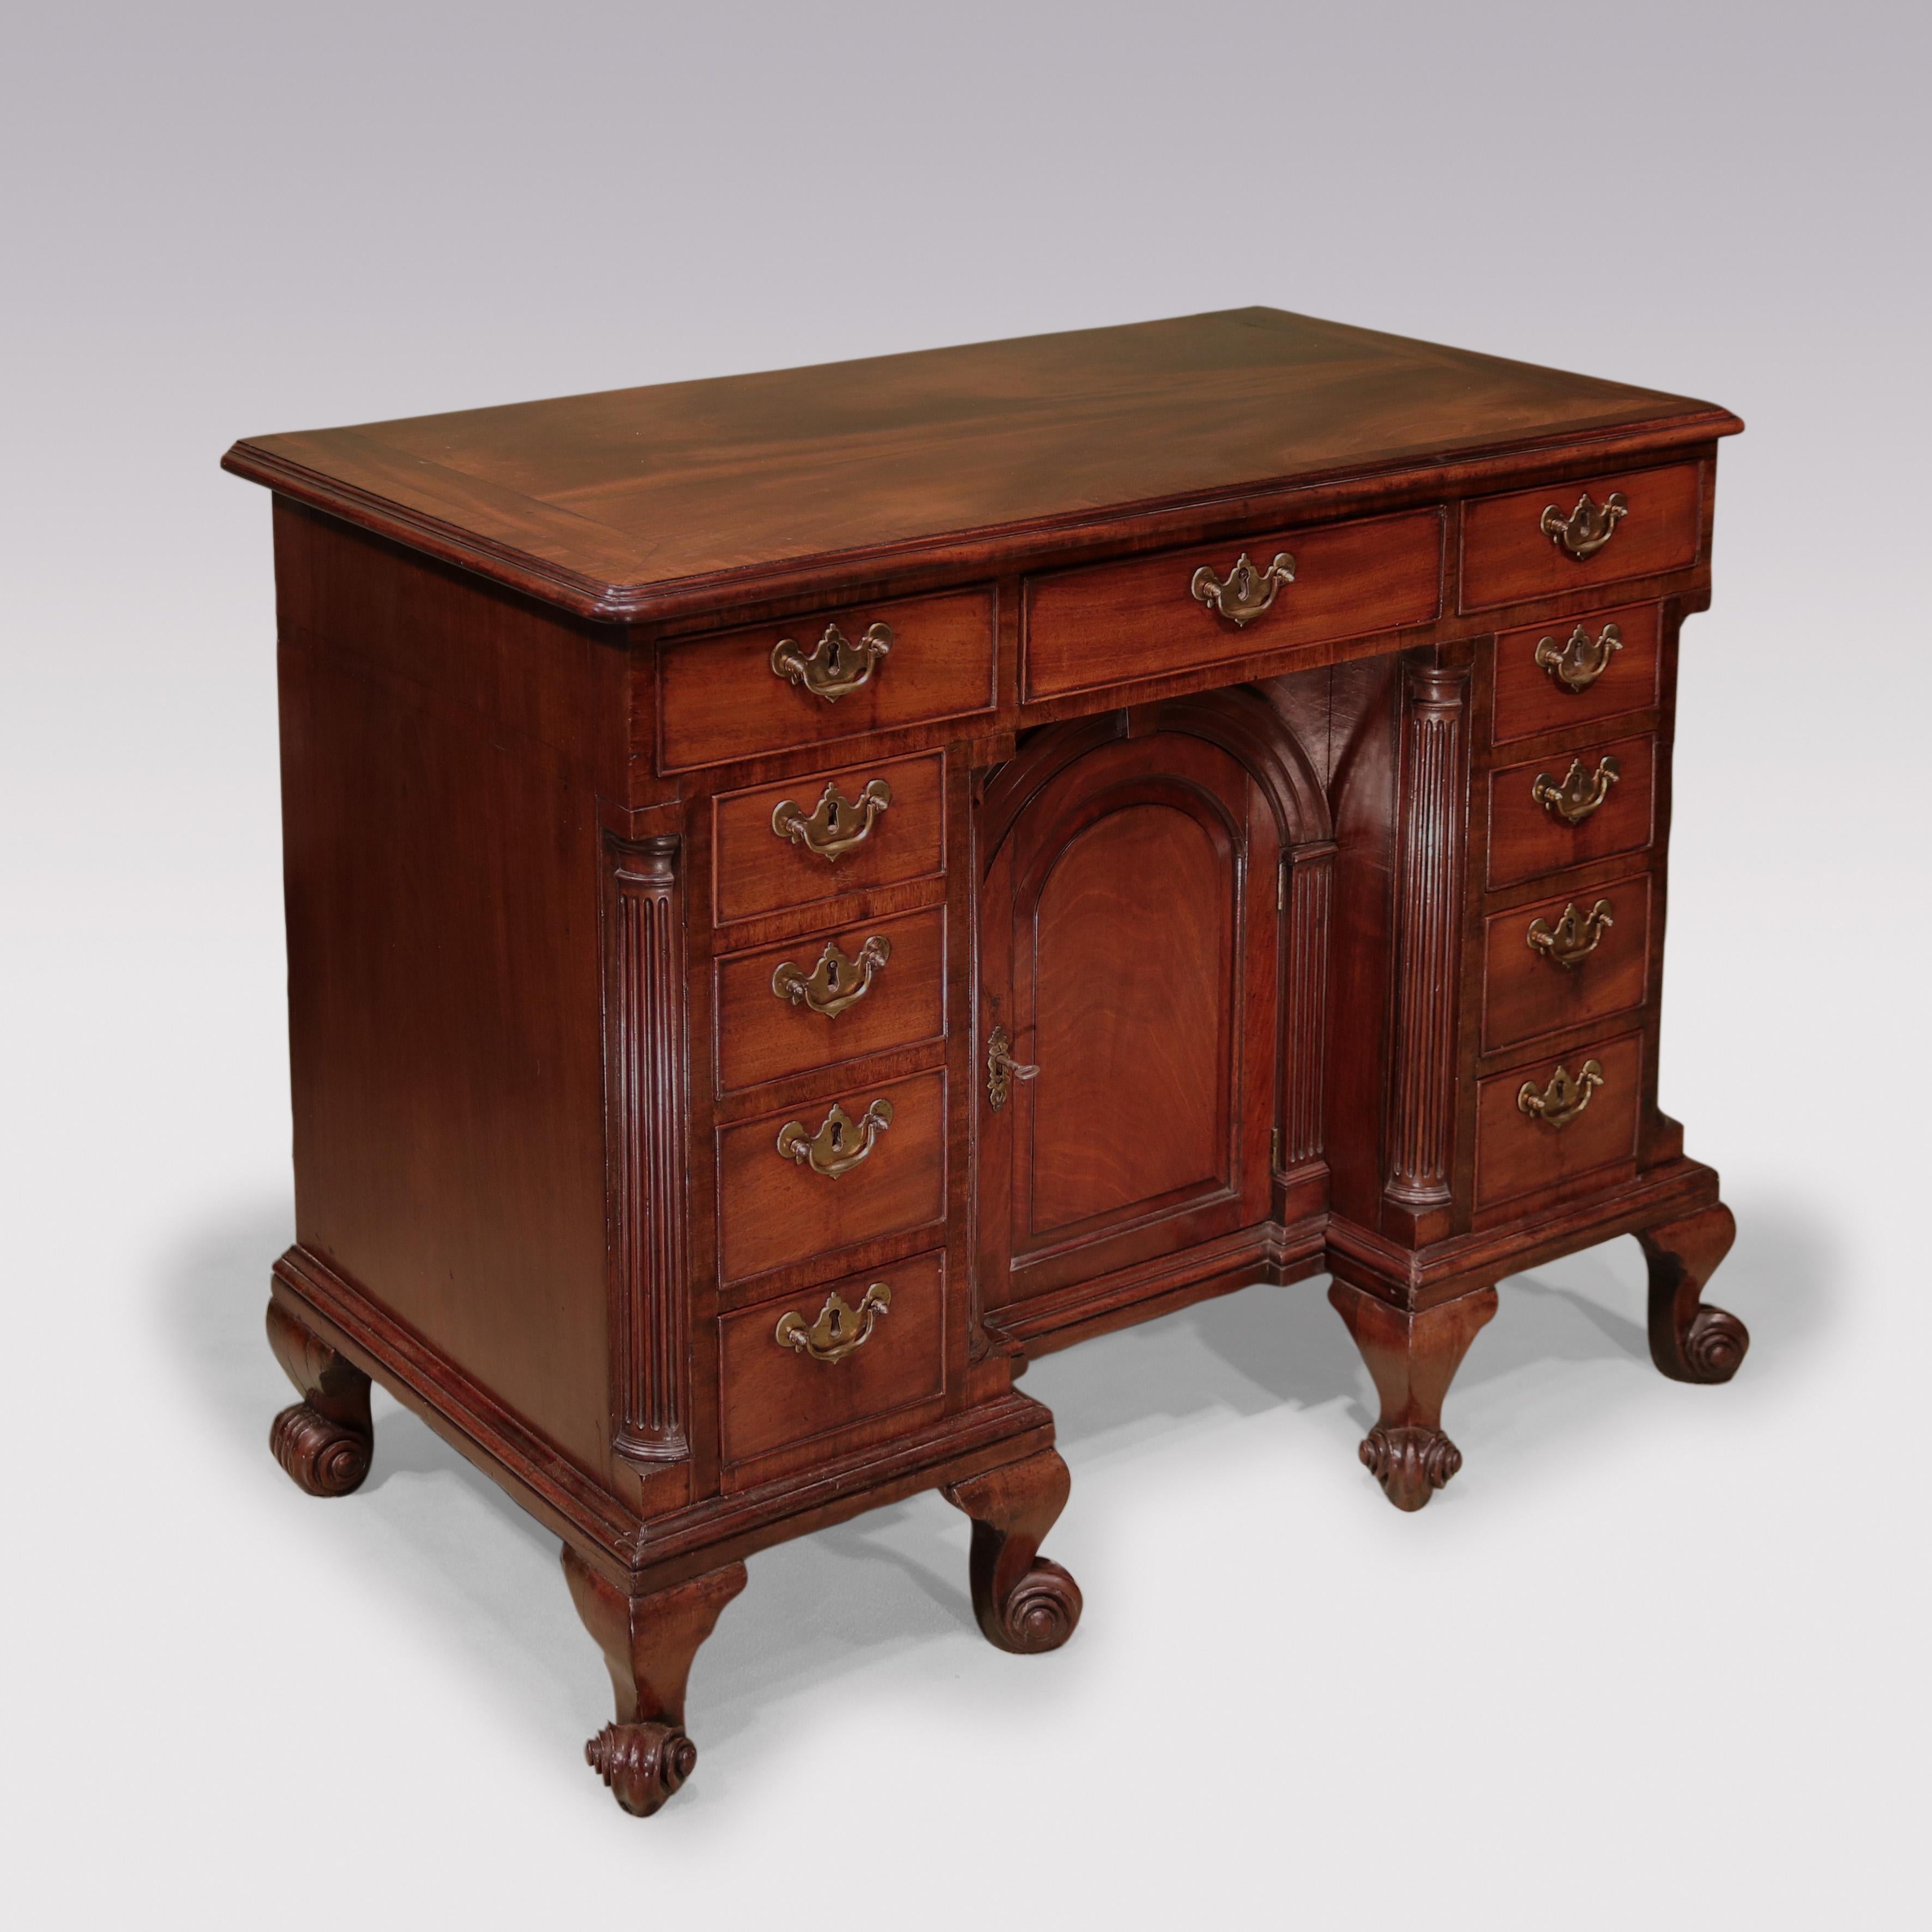 A fine George II period figured mahogany Kneehole Chest, having moulded edged crossbanded cleated top above various drawers retaining original brass backplate handles.  The piece with column corners, having central sliding arched cupboard door